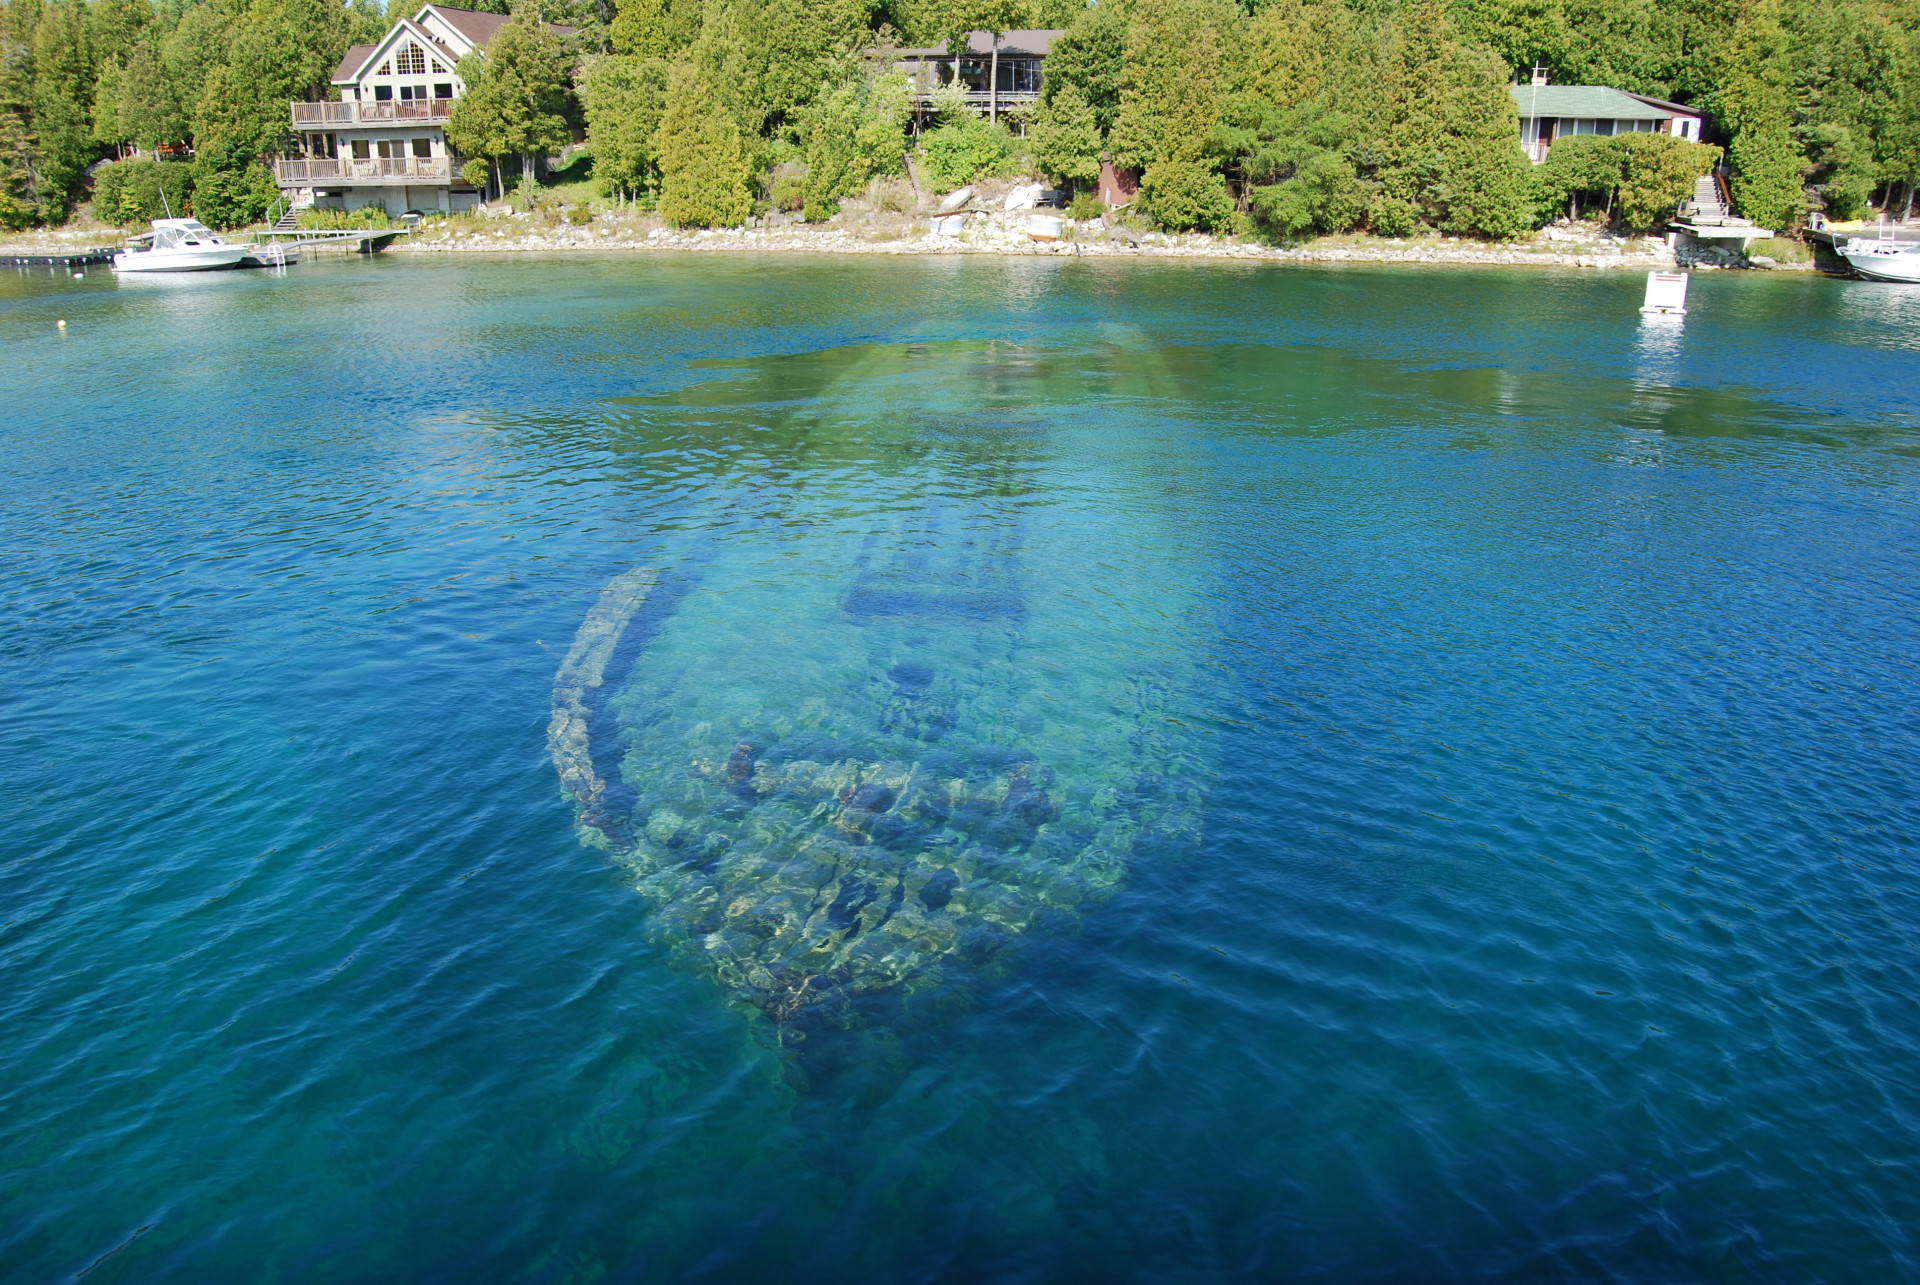 Located in Lake Huron in Ontario, this Canadian schooner, called 'Sweepstakes,' sank in September 1885.<p><a href="https://www.msn.com/en-sg/community/channel/vid-7xx8mnucu55yw63we9va2gwr7uihbxwc68fxqp25x6tg4ftibpra?cvid=94631541bc0f4f89bfd59158d696ad7e">Follow us and access great exclusive content every day</a></p>